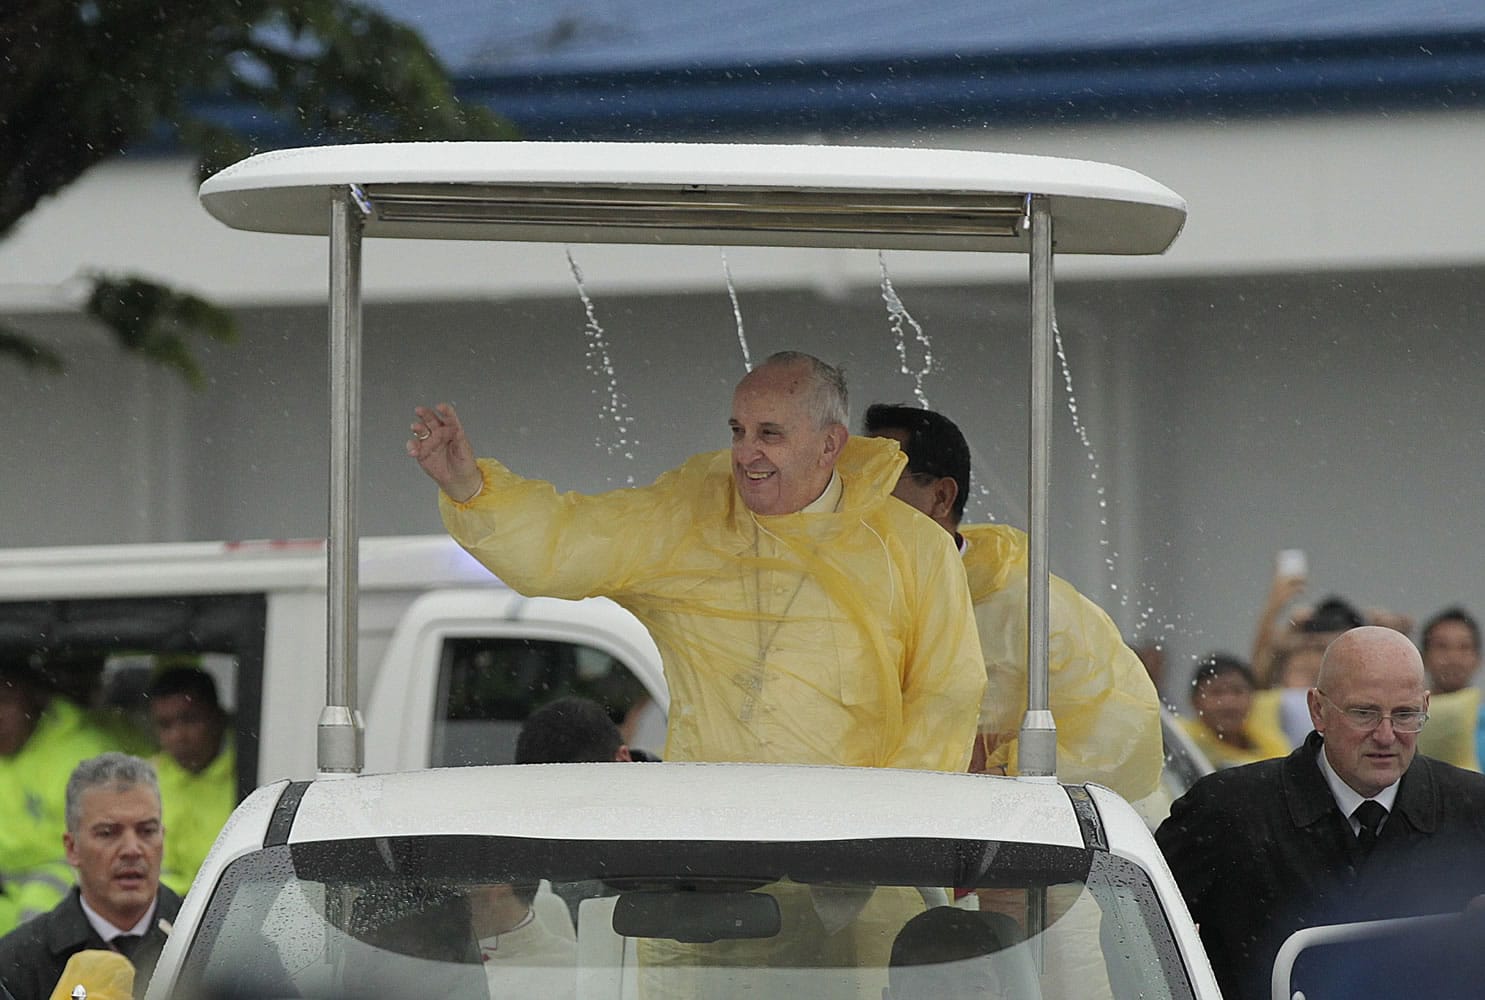 Pope Francis waves to the faithful on his arrival in Tacloban, Philippines, as rain drips from the roof of his vehicle.